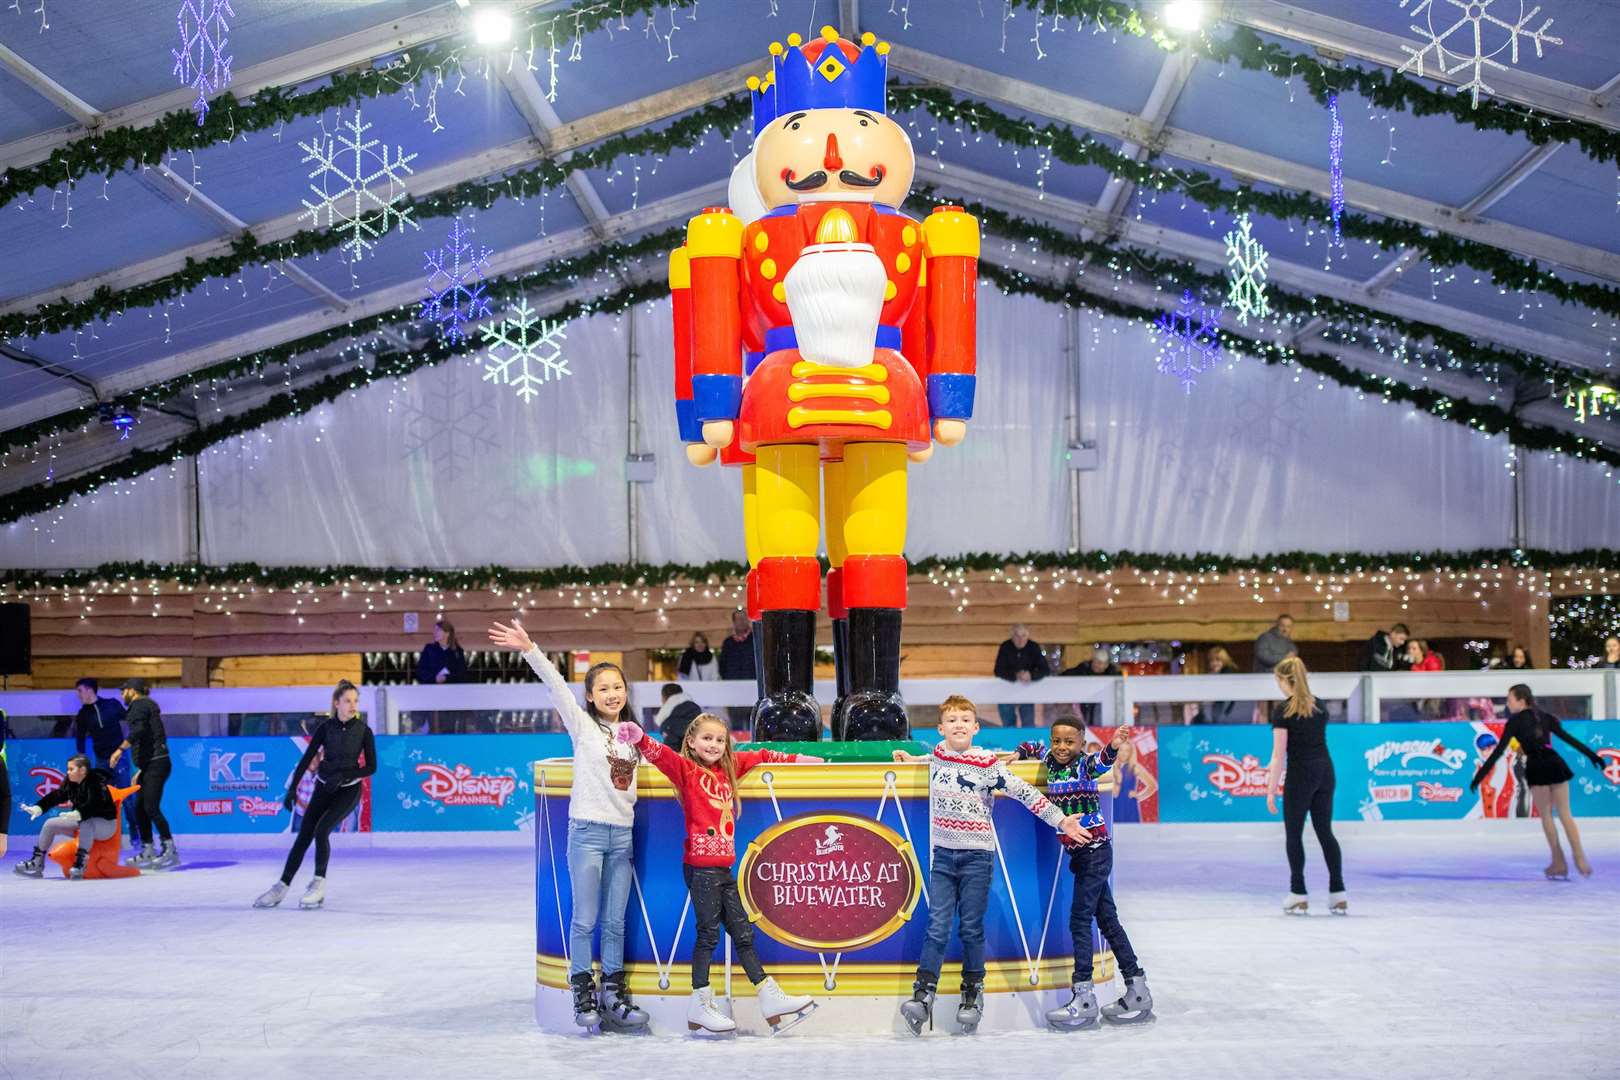 Bluewater's ice rink has now opened